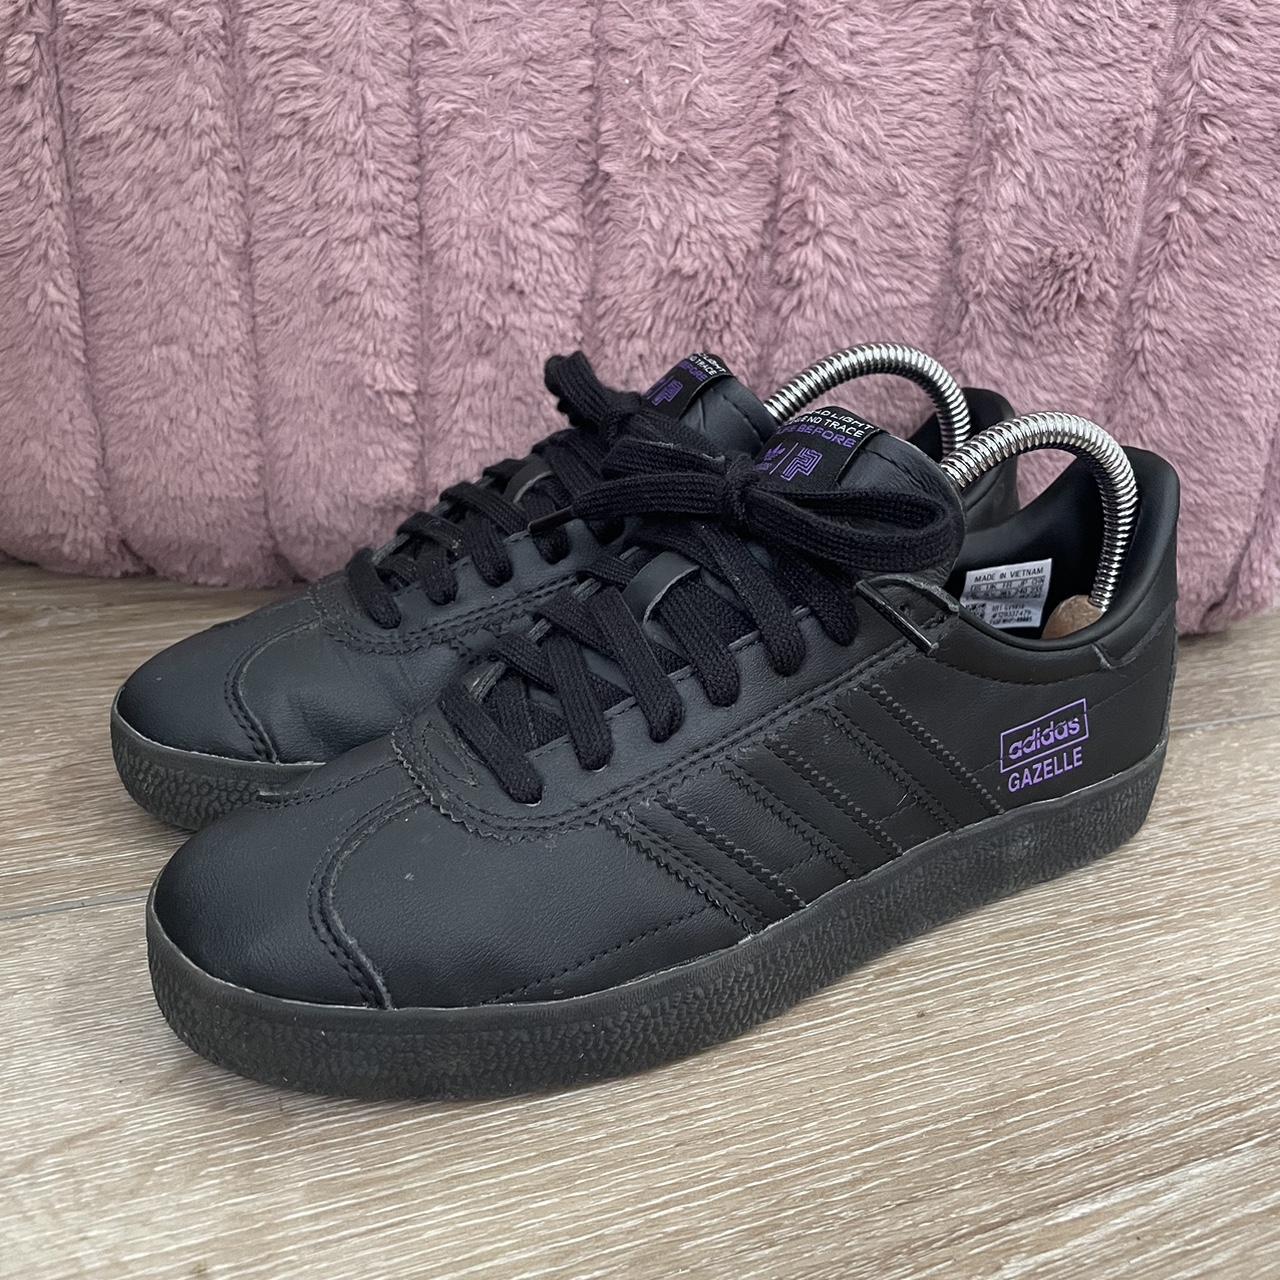 Adidas Men's Black and Purple Boots